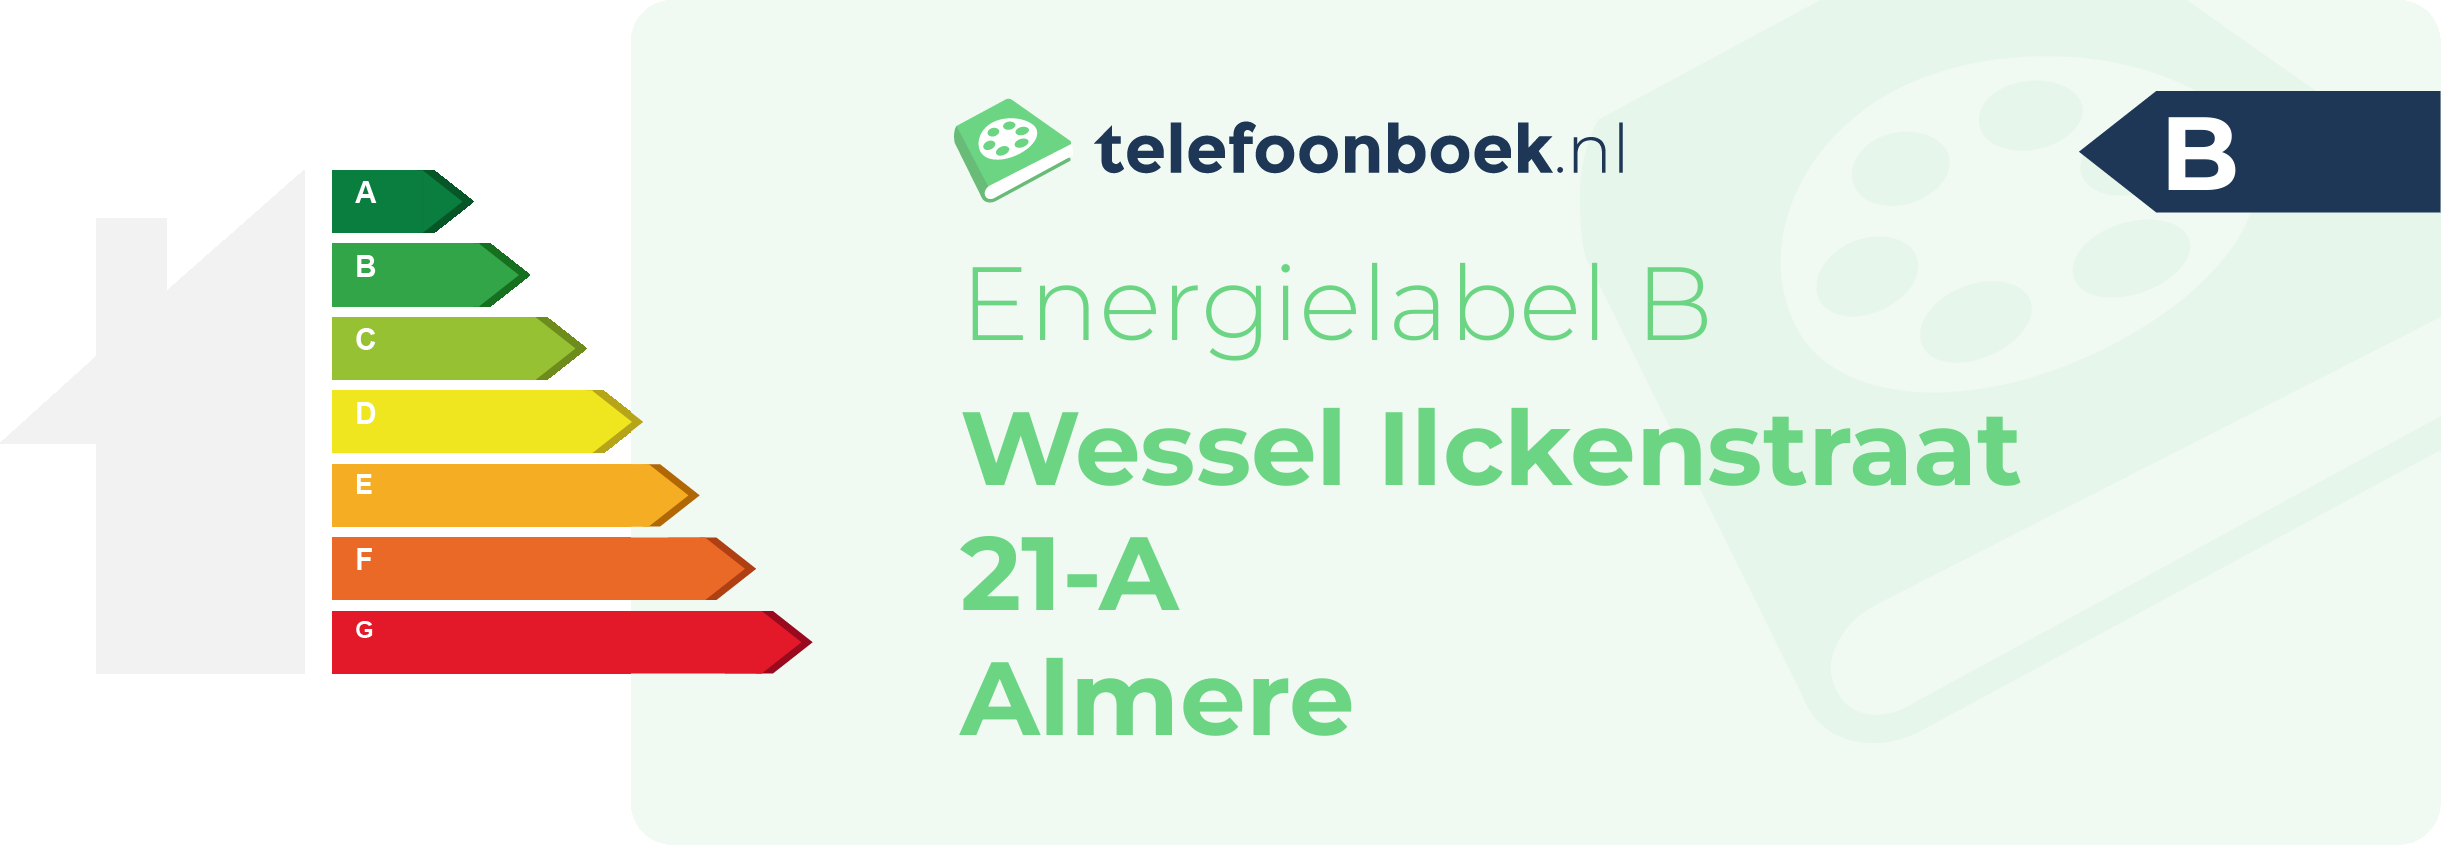 Energielabel Wessel Ilckenstraat 21-A Almere